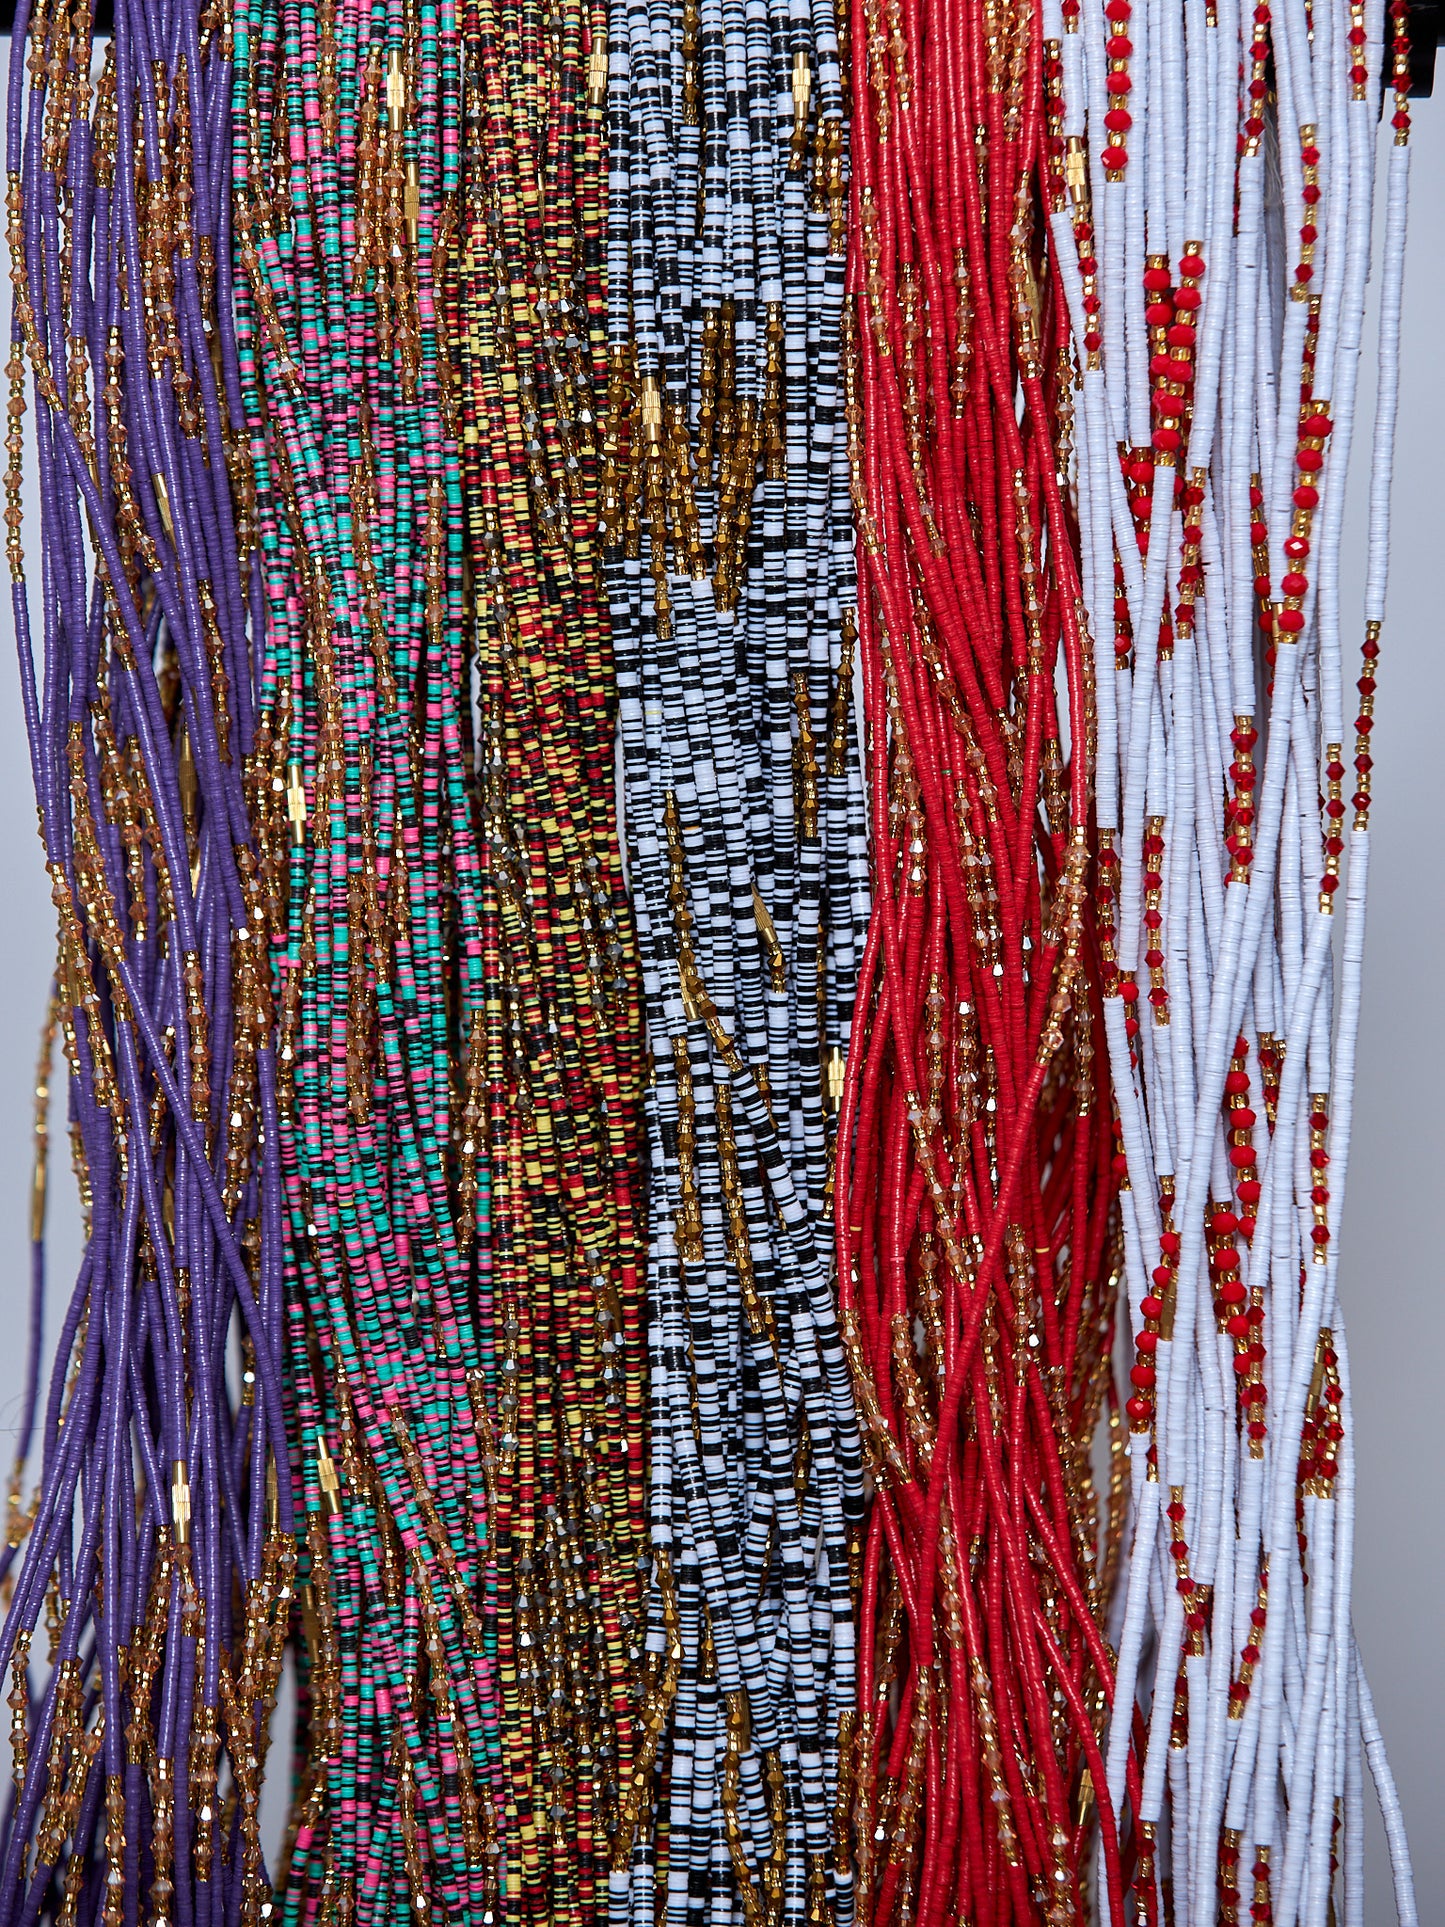 6 Different Colored typed of waist beads Including 52 Inches White And Black Vinyl Beads With Gold Glass Beads And Brown Pebble Bar Removable Screw Waist Beads, 53 Inches Pink , Black And Green Vinyl Beads With Gold Glass Beads And Light Brown Pebble Bar Removable Screw Waist Beads And 54 Inches Purple Vinyl Beads With Gold Glass Beads And Light Brown Pebble Bar Removable Screw Waist Beads